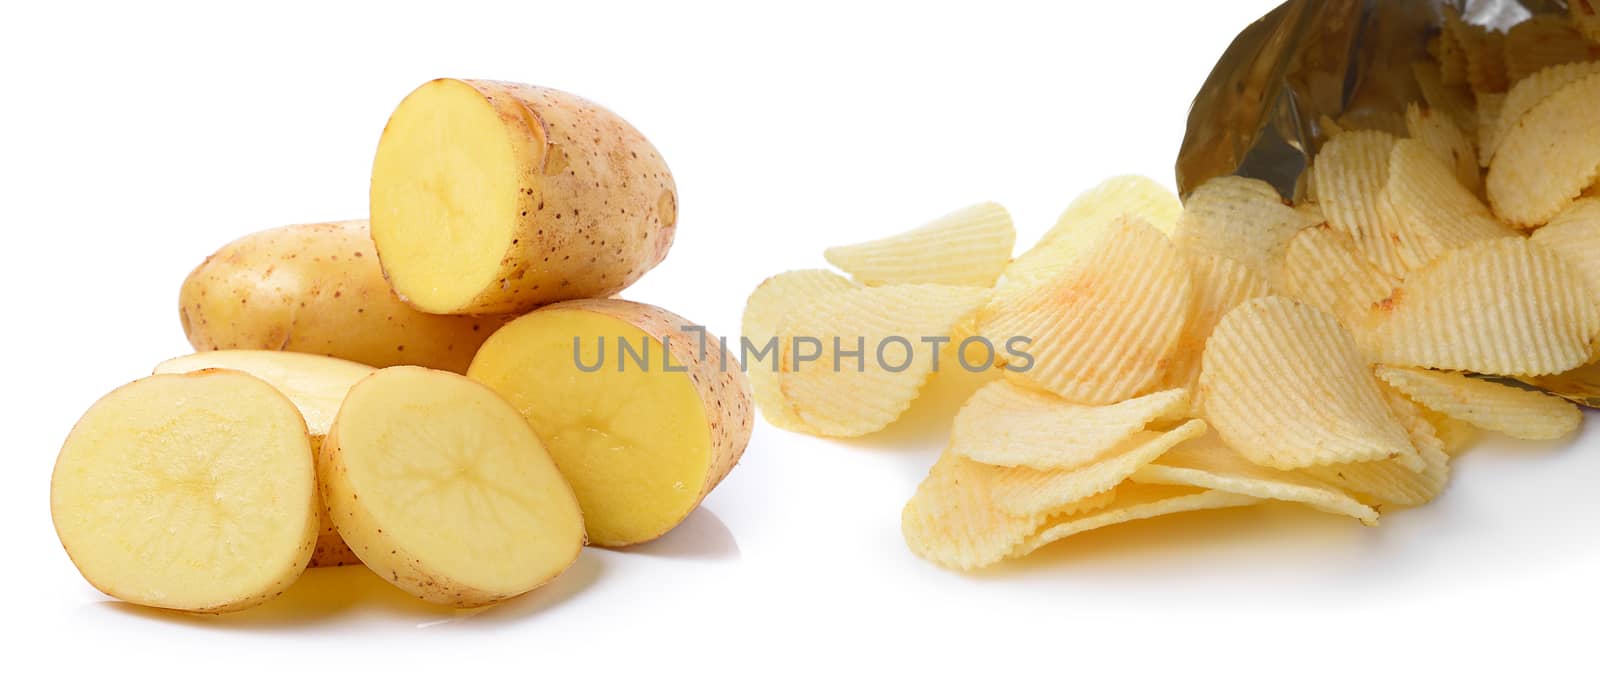 potato and Potato chips isolated on white background by sommai